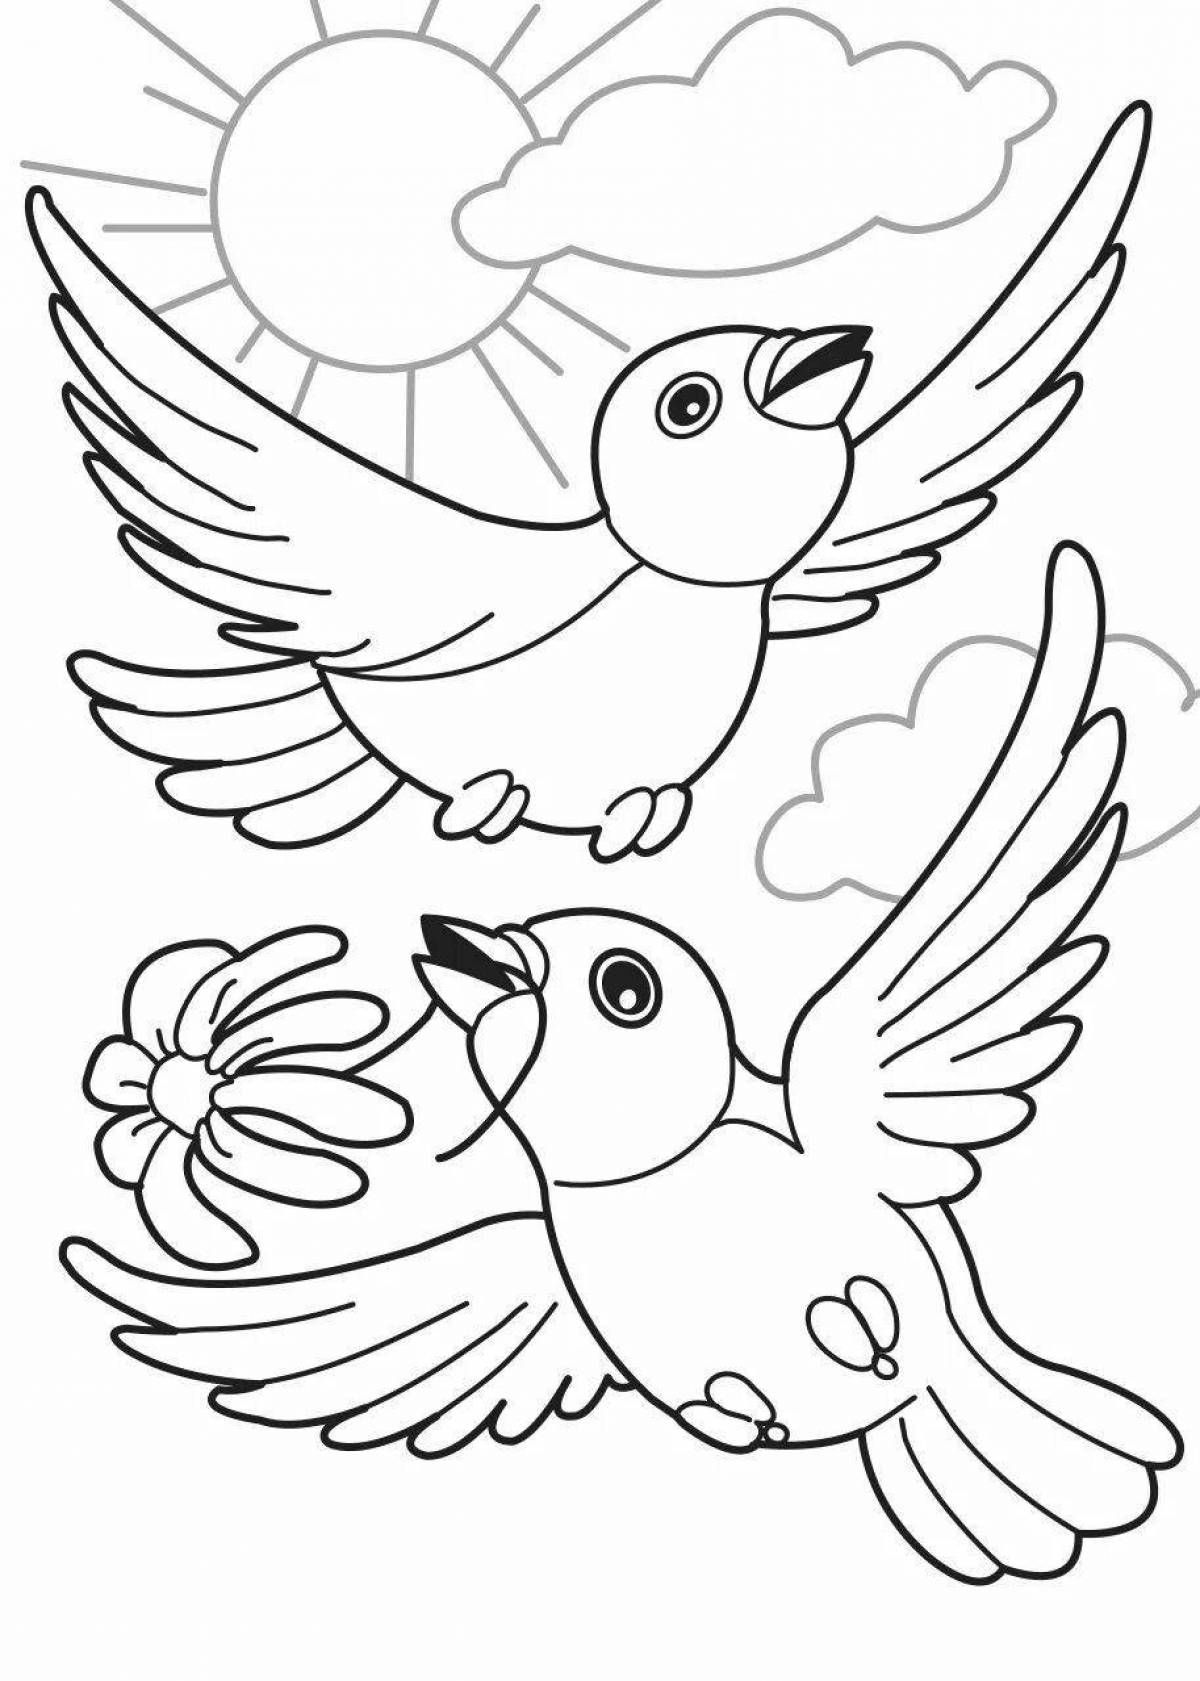 Incredible bird coloring book for 2-3 year olds